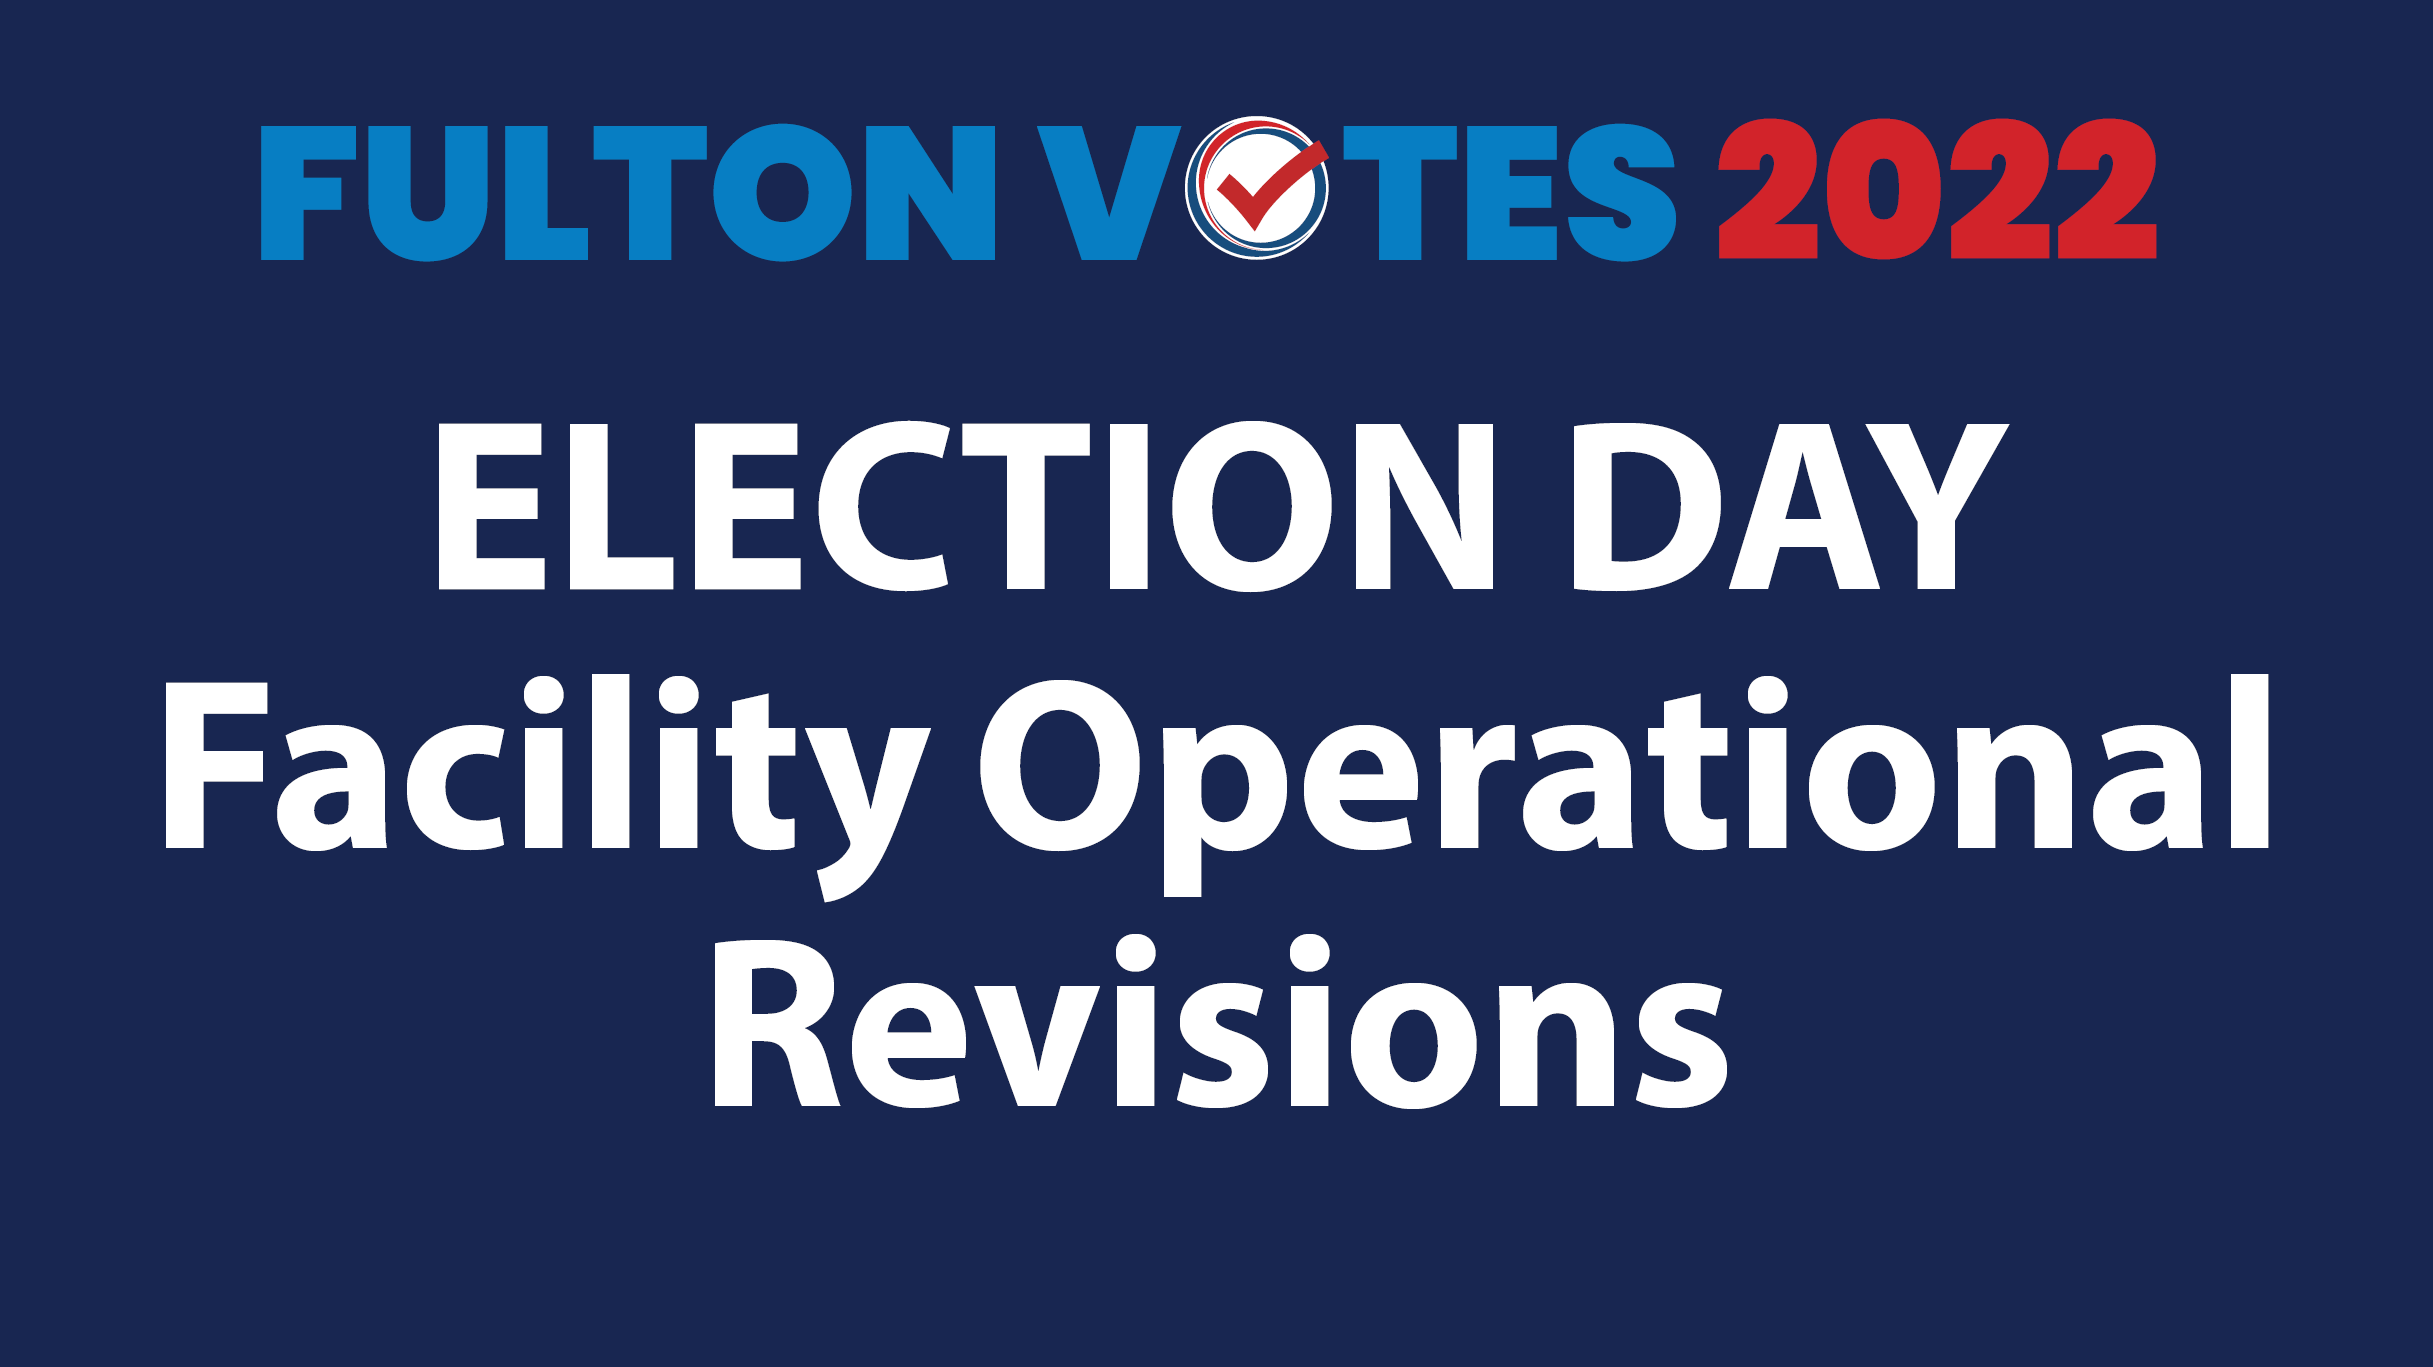 An image of Election Day Facility Operational Revisions